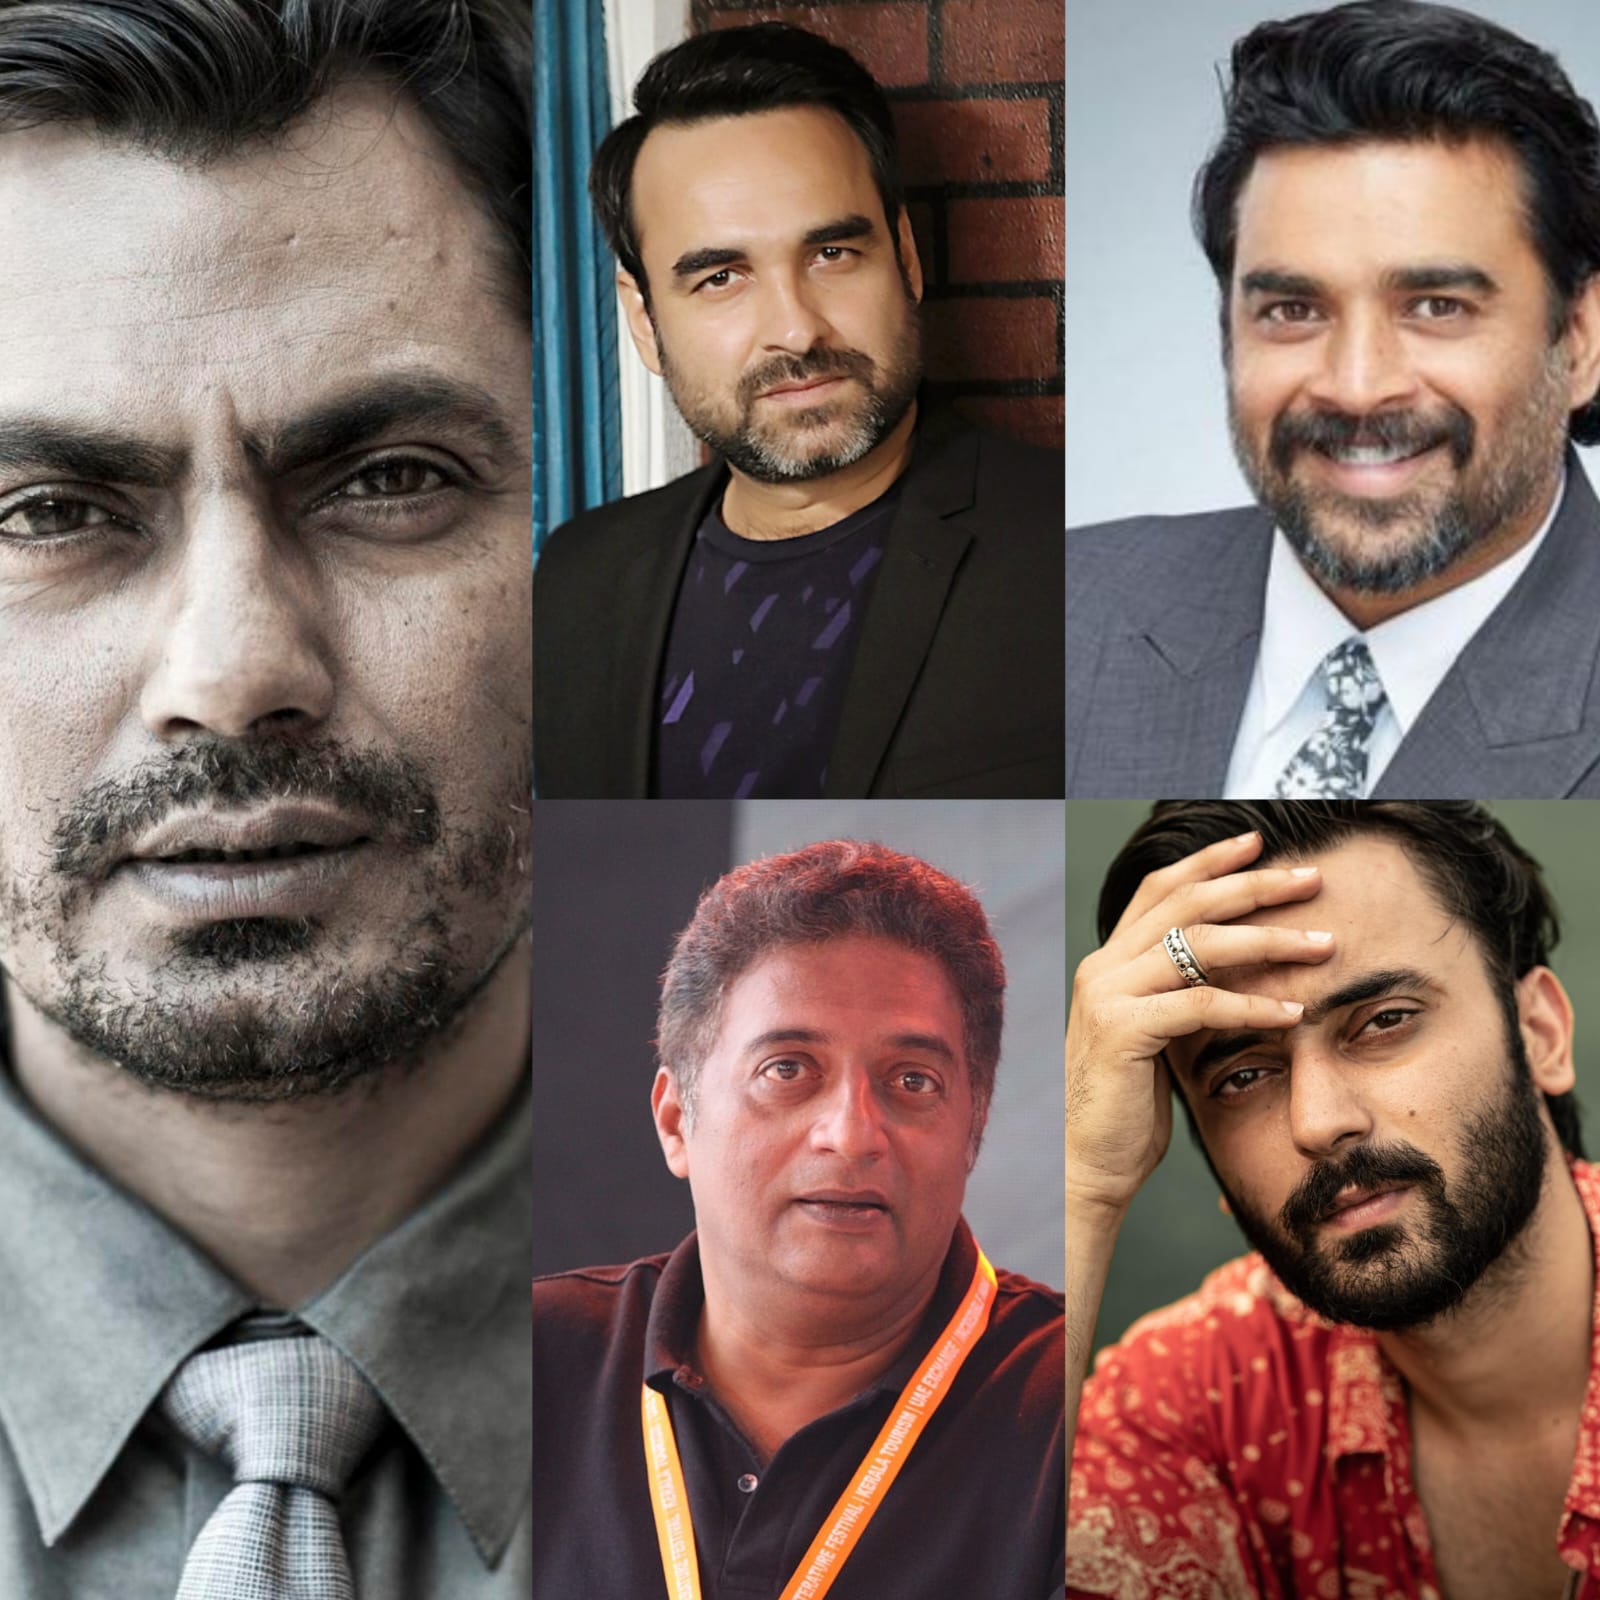 From greens to screens: Pankaj Tripathi, Nawazuddin Siddiqui to Paramvir Cheema, 5 actors who stay connected to their roots through farming